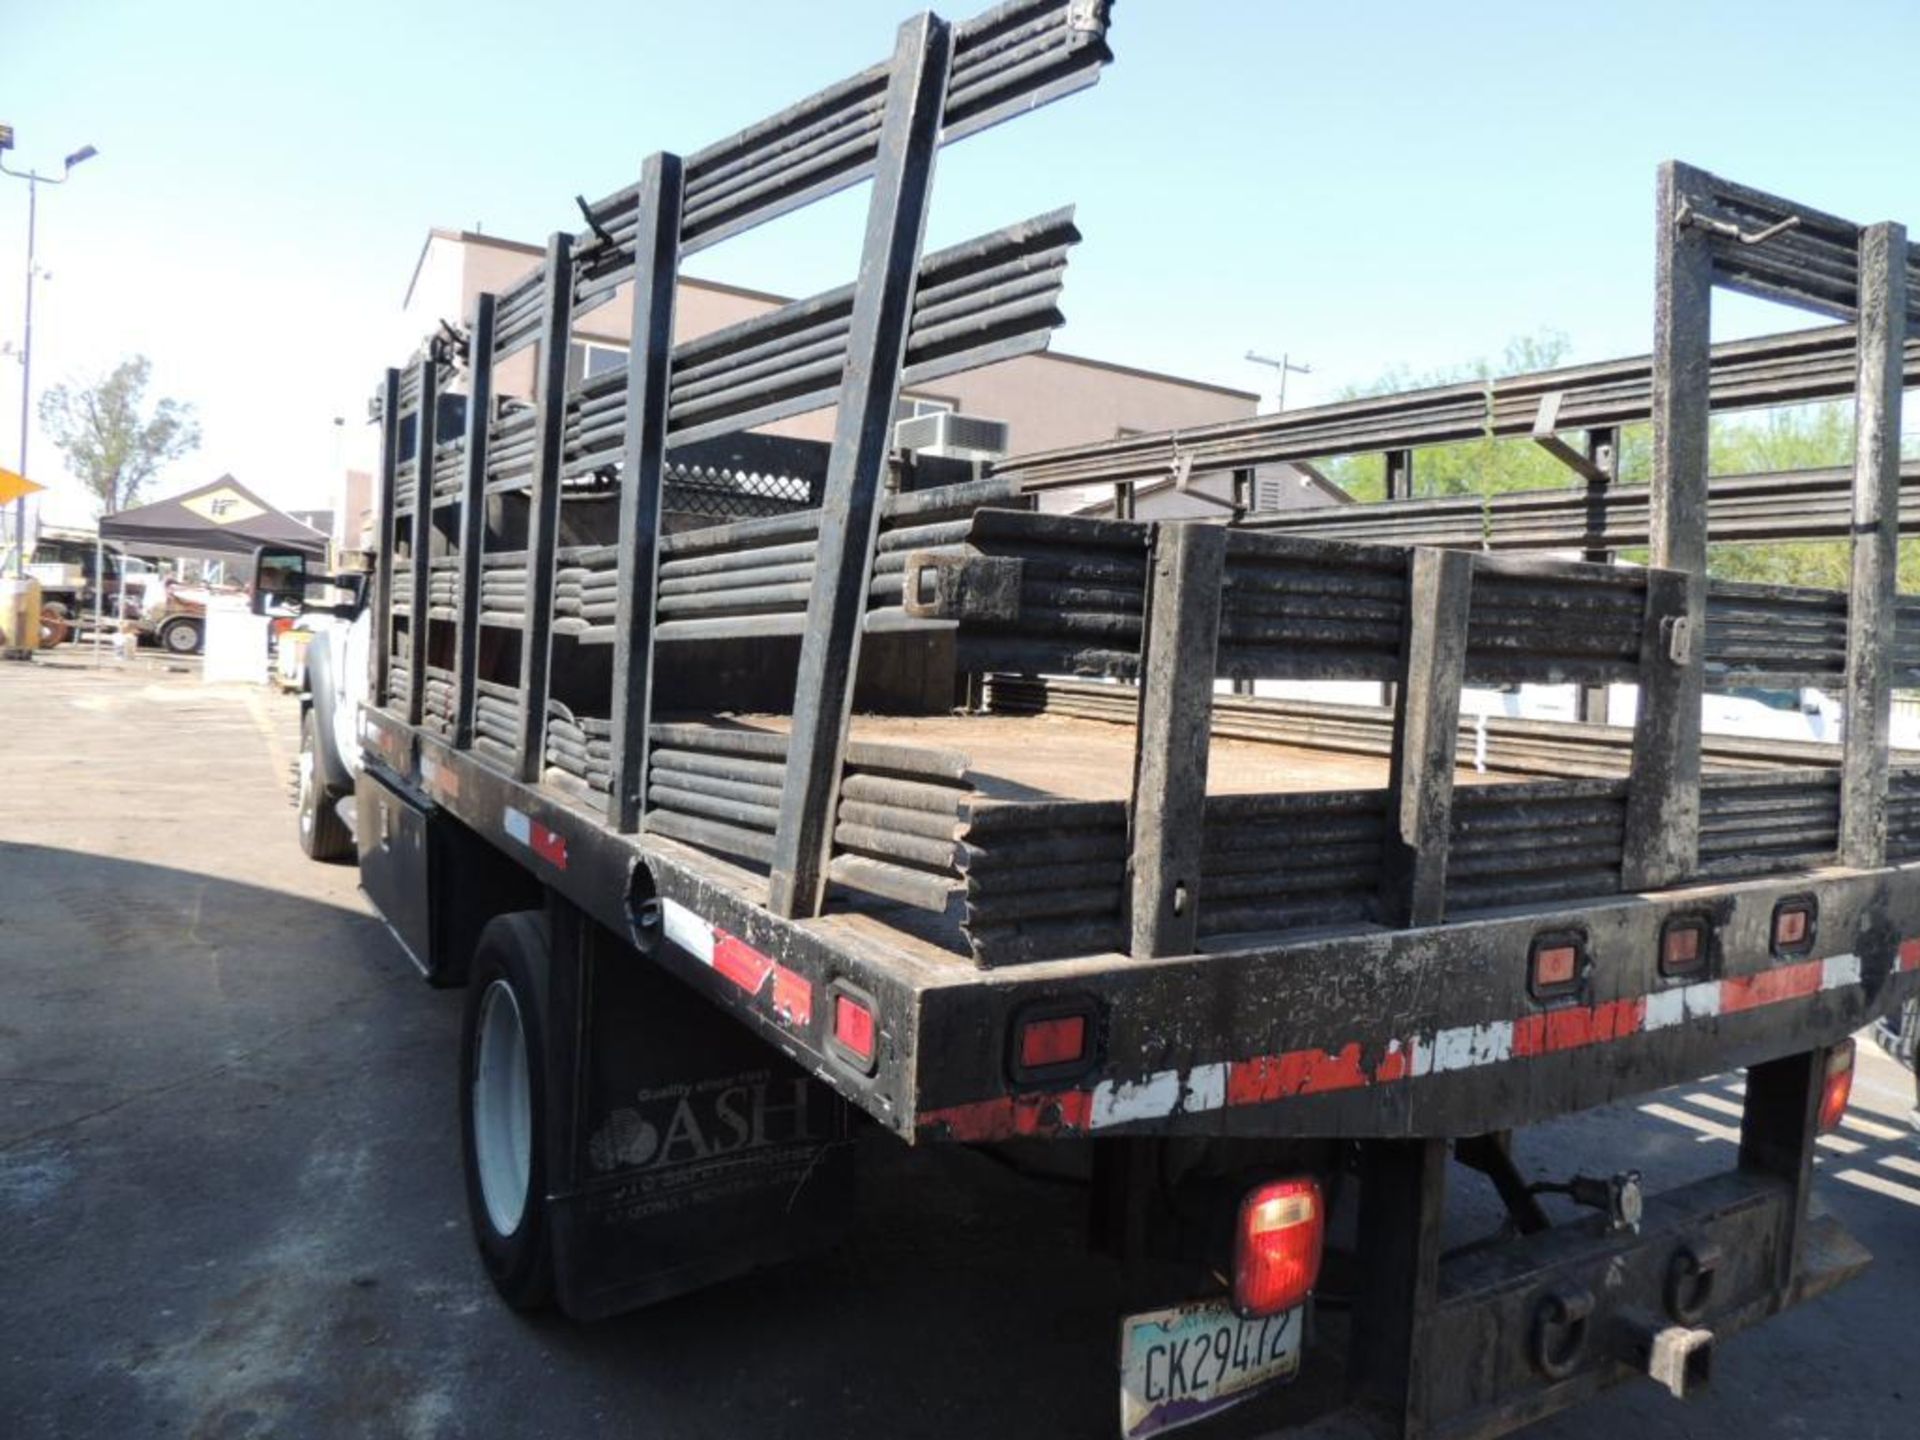 2016 Ford F450 XL SD Crew Cab 12 ft. Flatbed, VIN # 1FD0W4GT2GEC53691, 6.7 Ltr. Auto Trans, 100 Gal. - Image 5 of 5